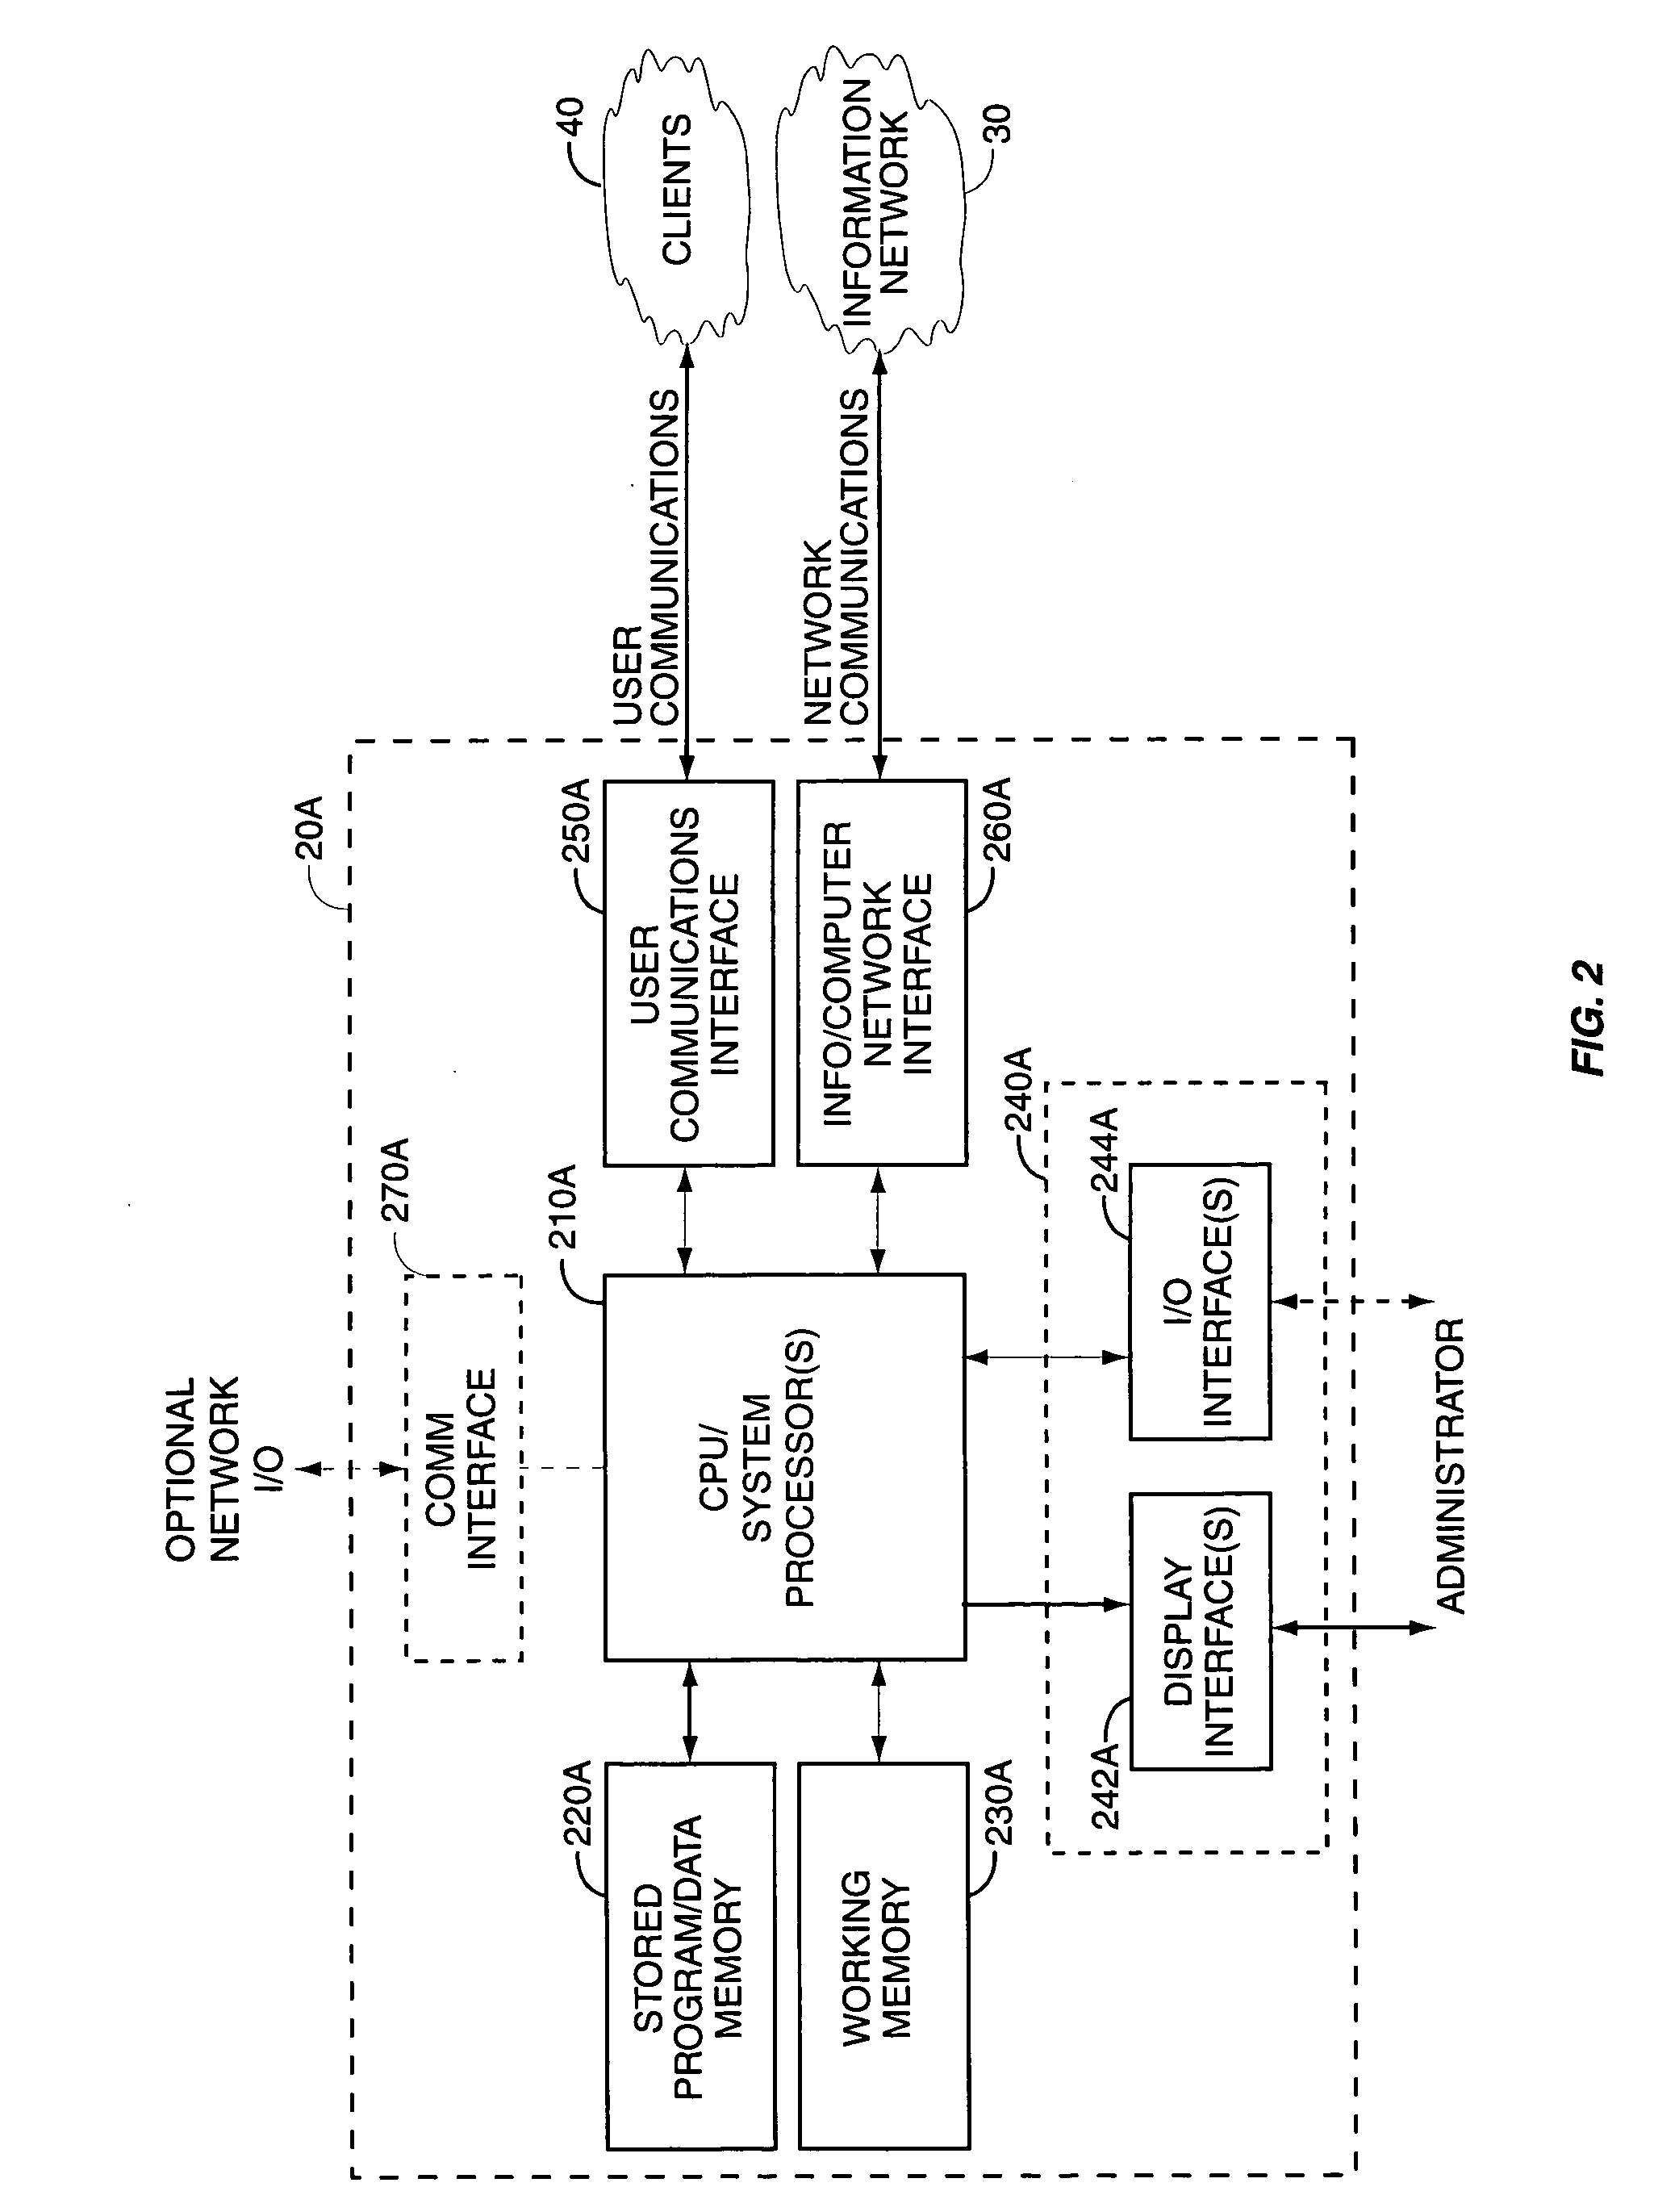 System and method for data collection, management, and analysis